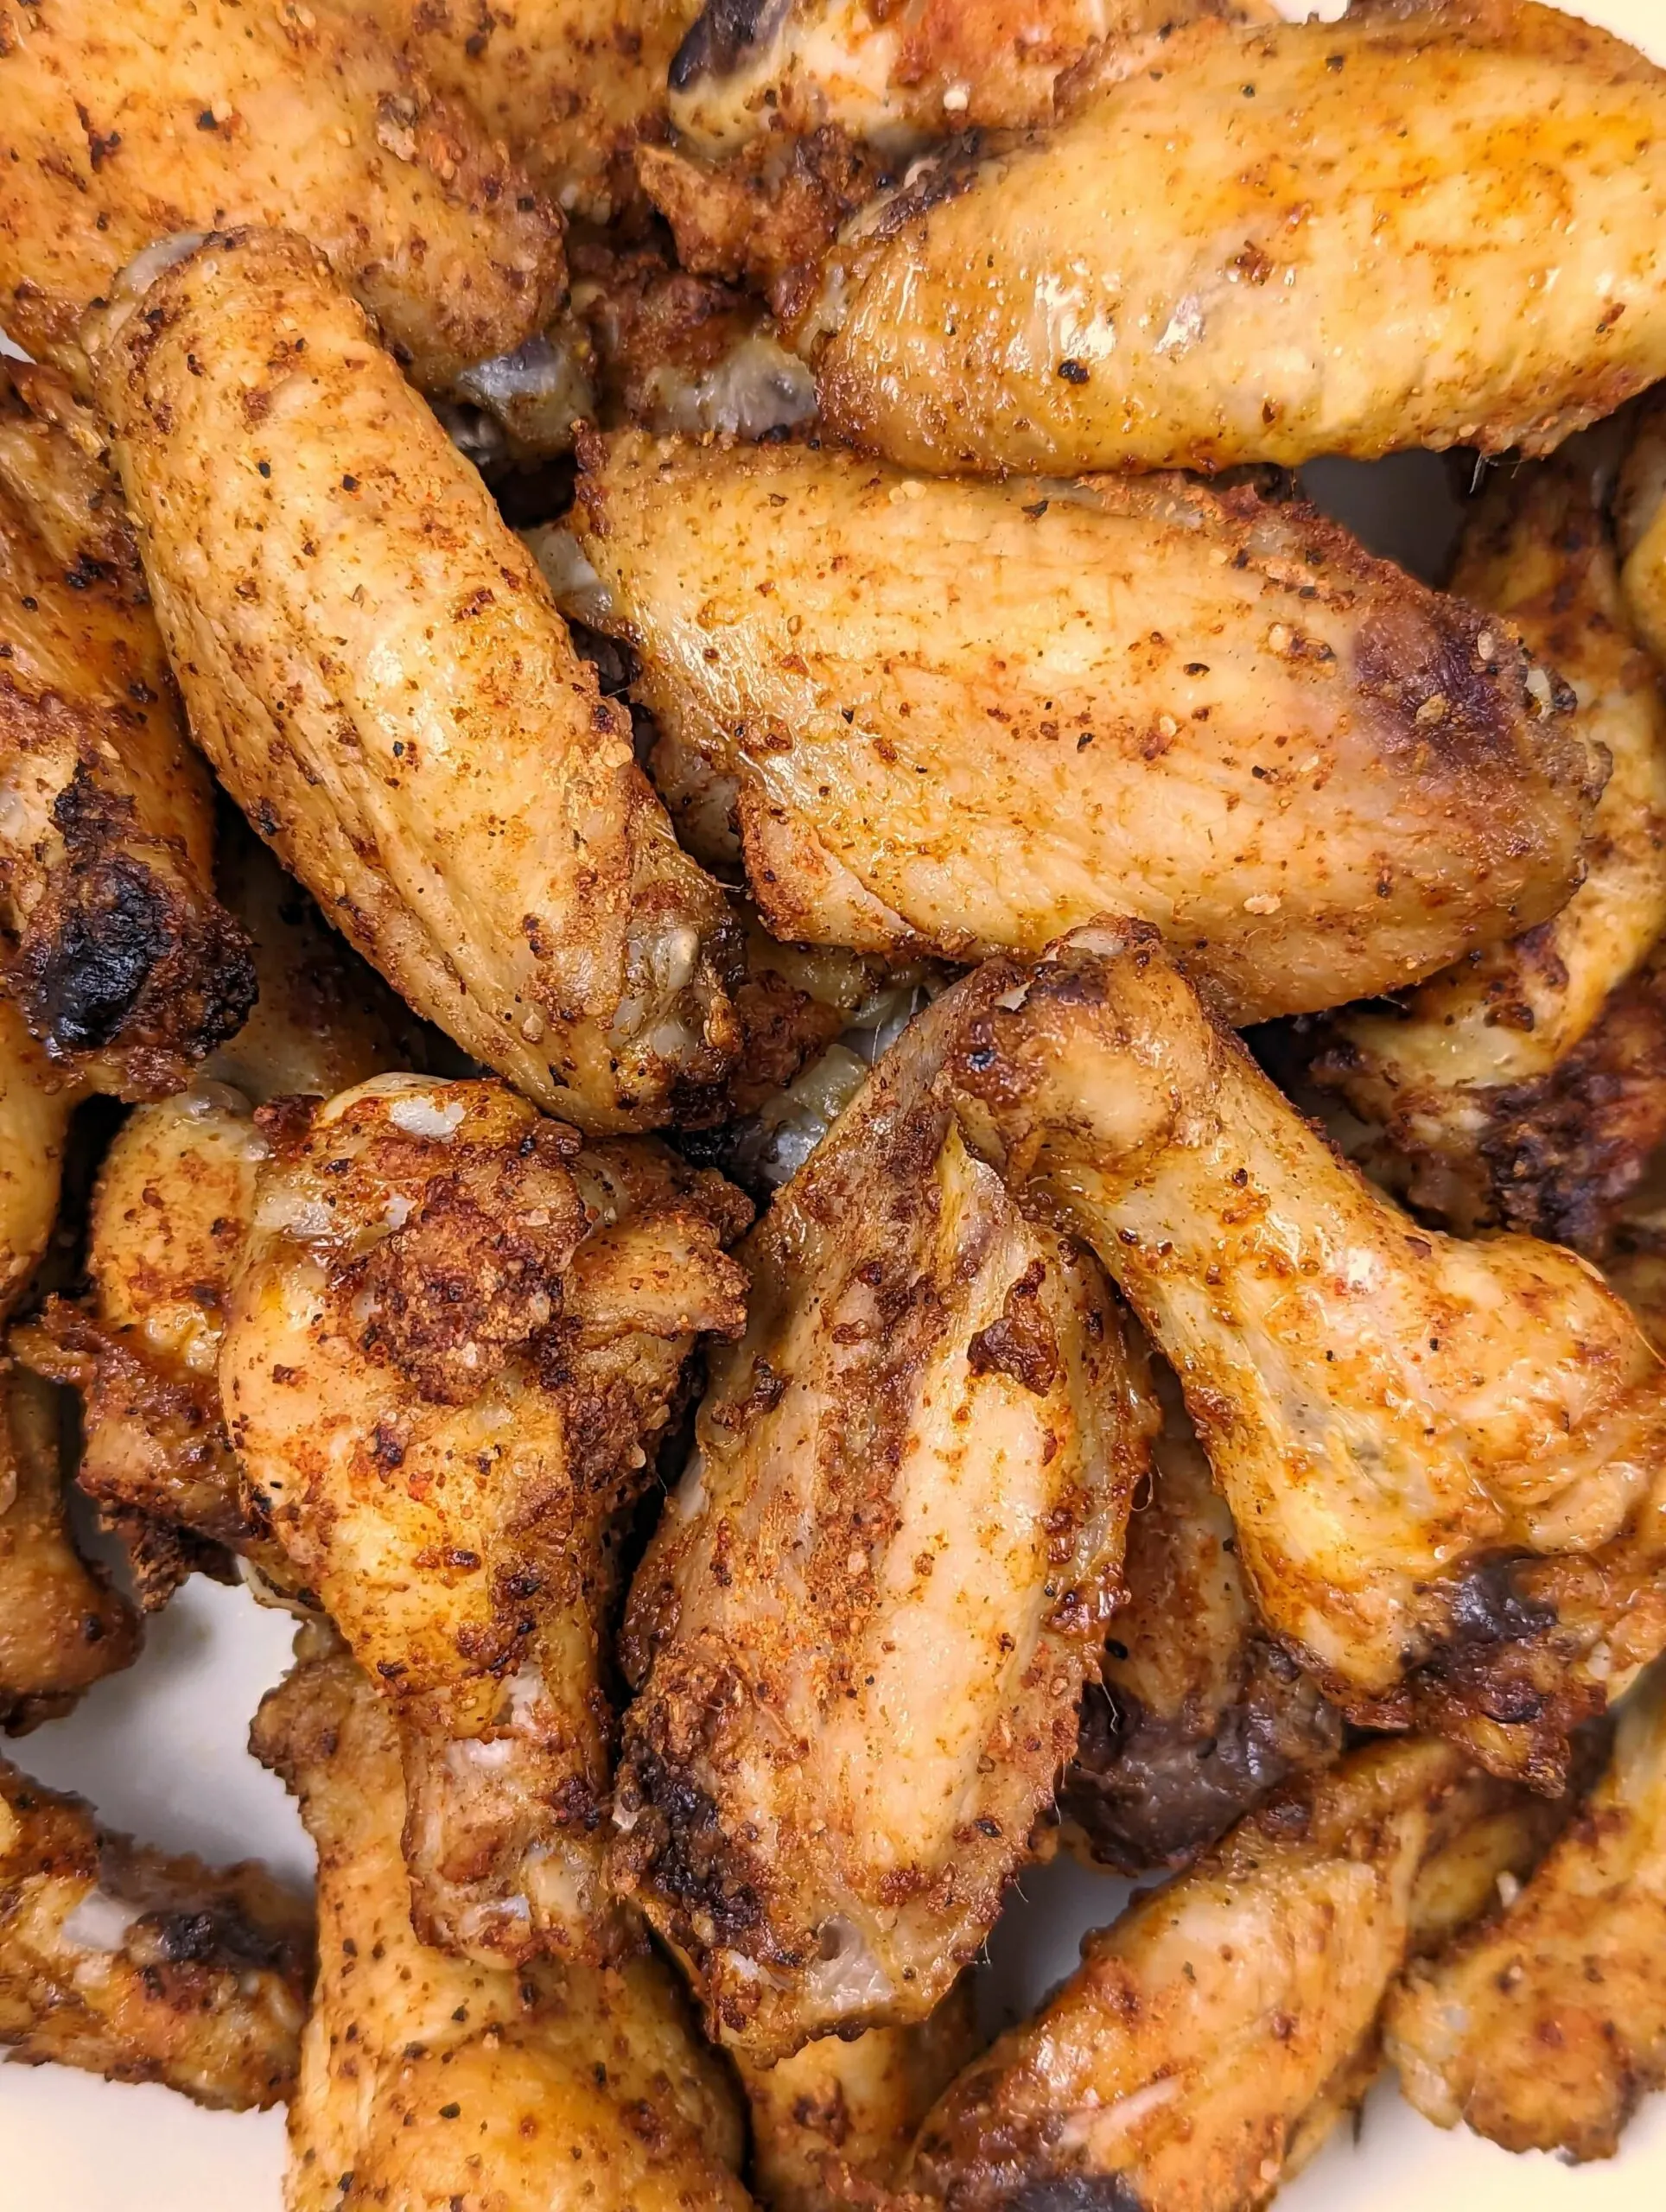 A close up of the chicken wings.